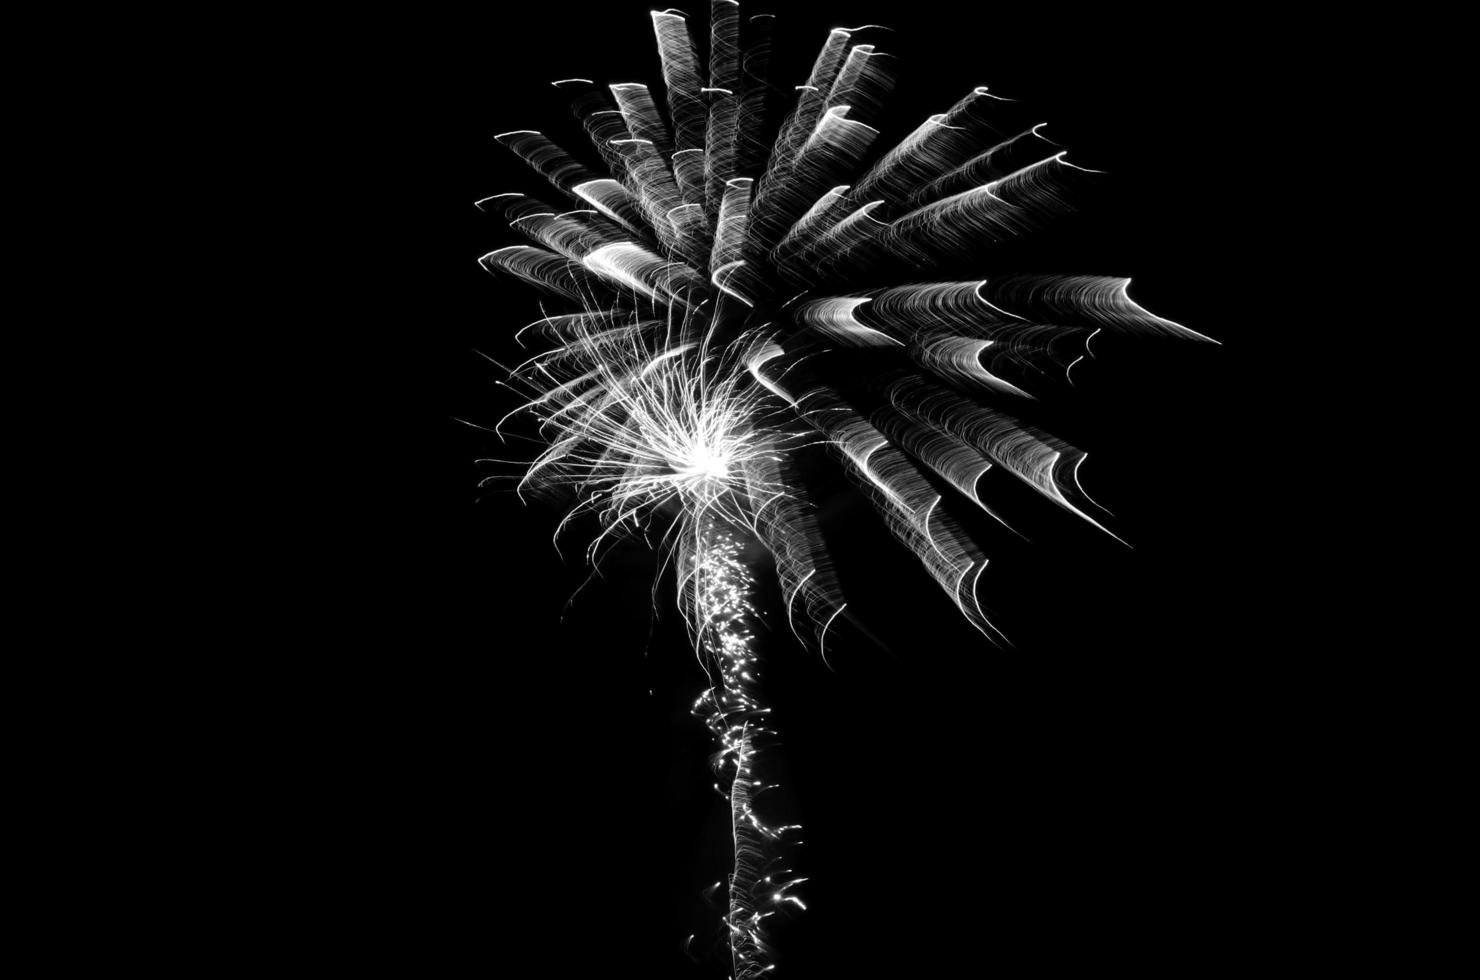 Fireworks in black and white photo